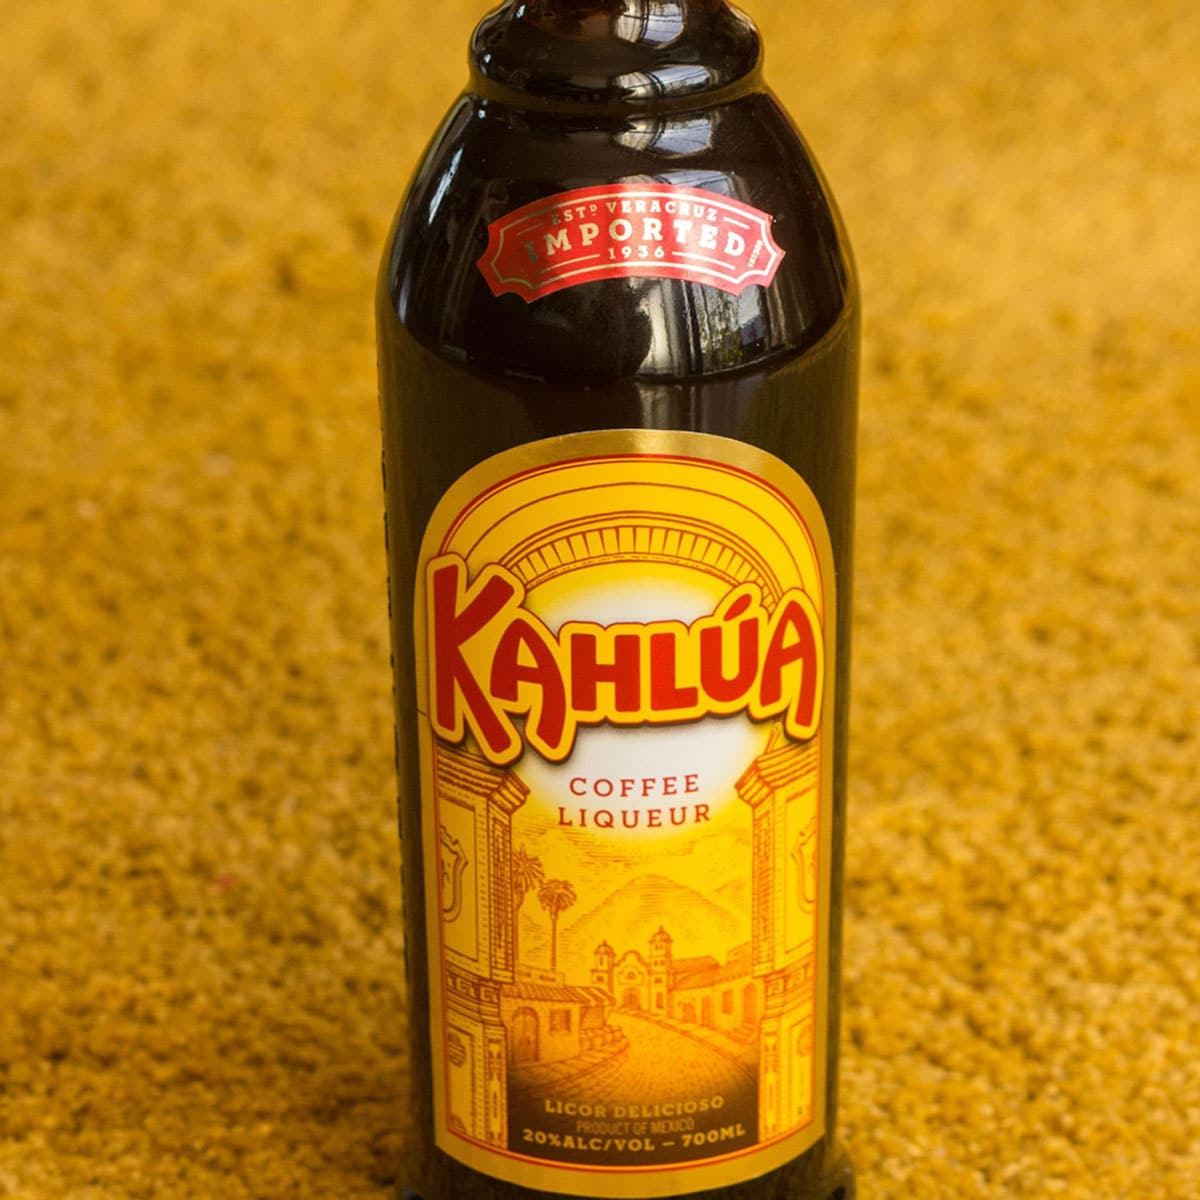 I know that the shelf life of neat spirits like gin, vodka, and whisky is almost endless, but what about flavored liqueurs like Kahlúa? Actually, it’s not too bad – around four years after it’s bottled.